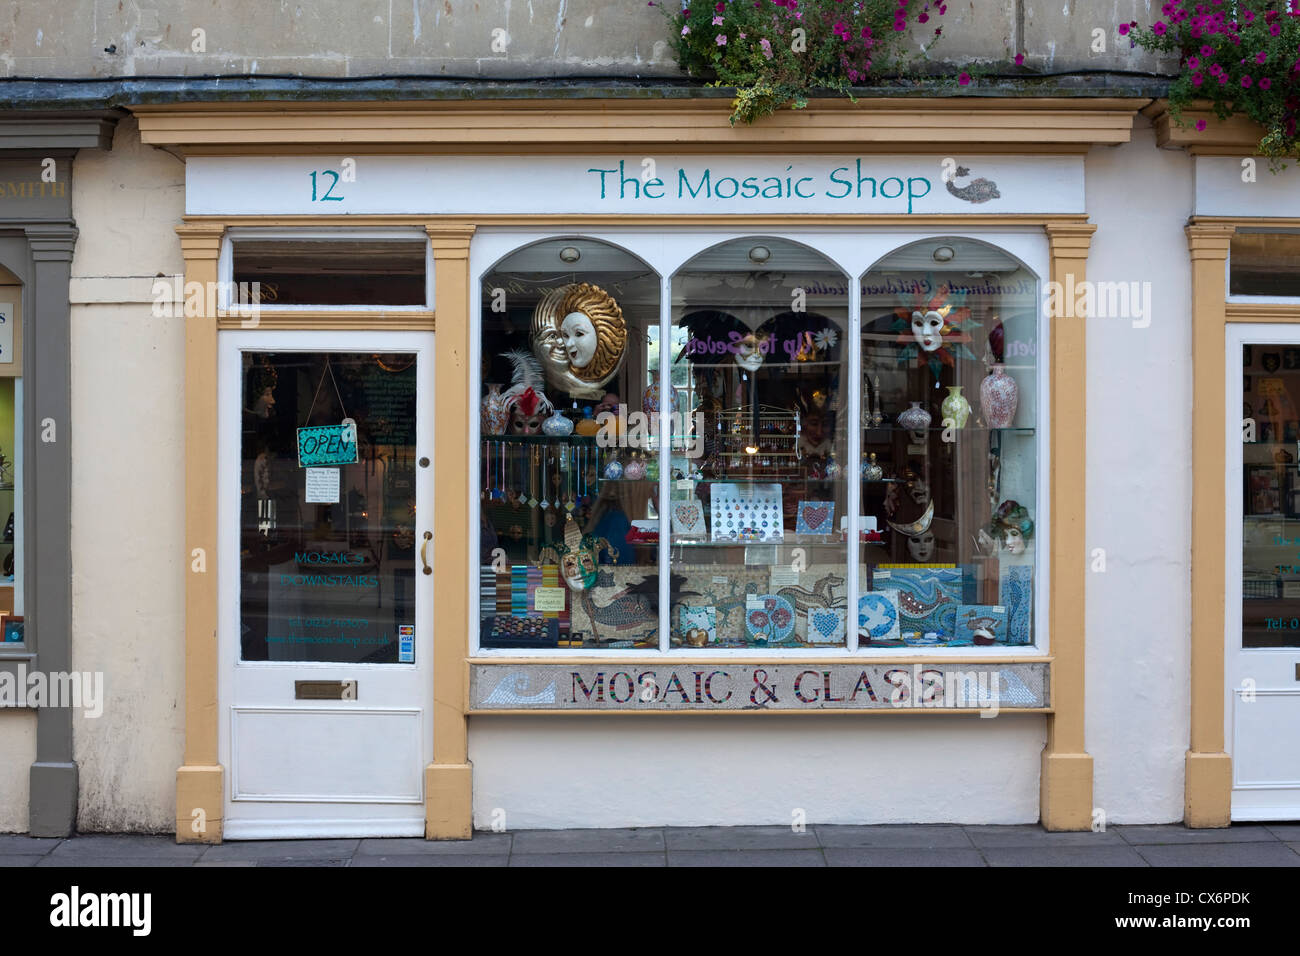 mosaic and glass shop front displaying goods for sale Stock Photo